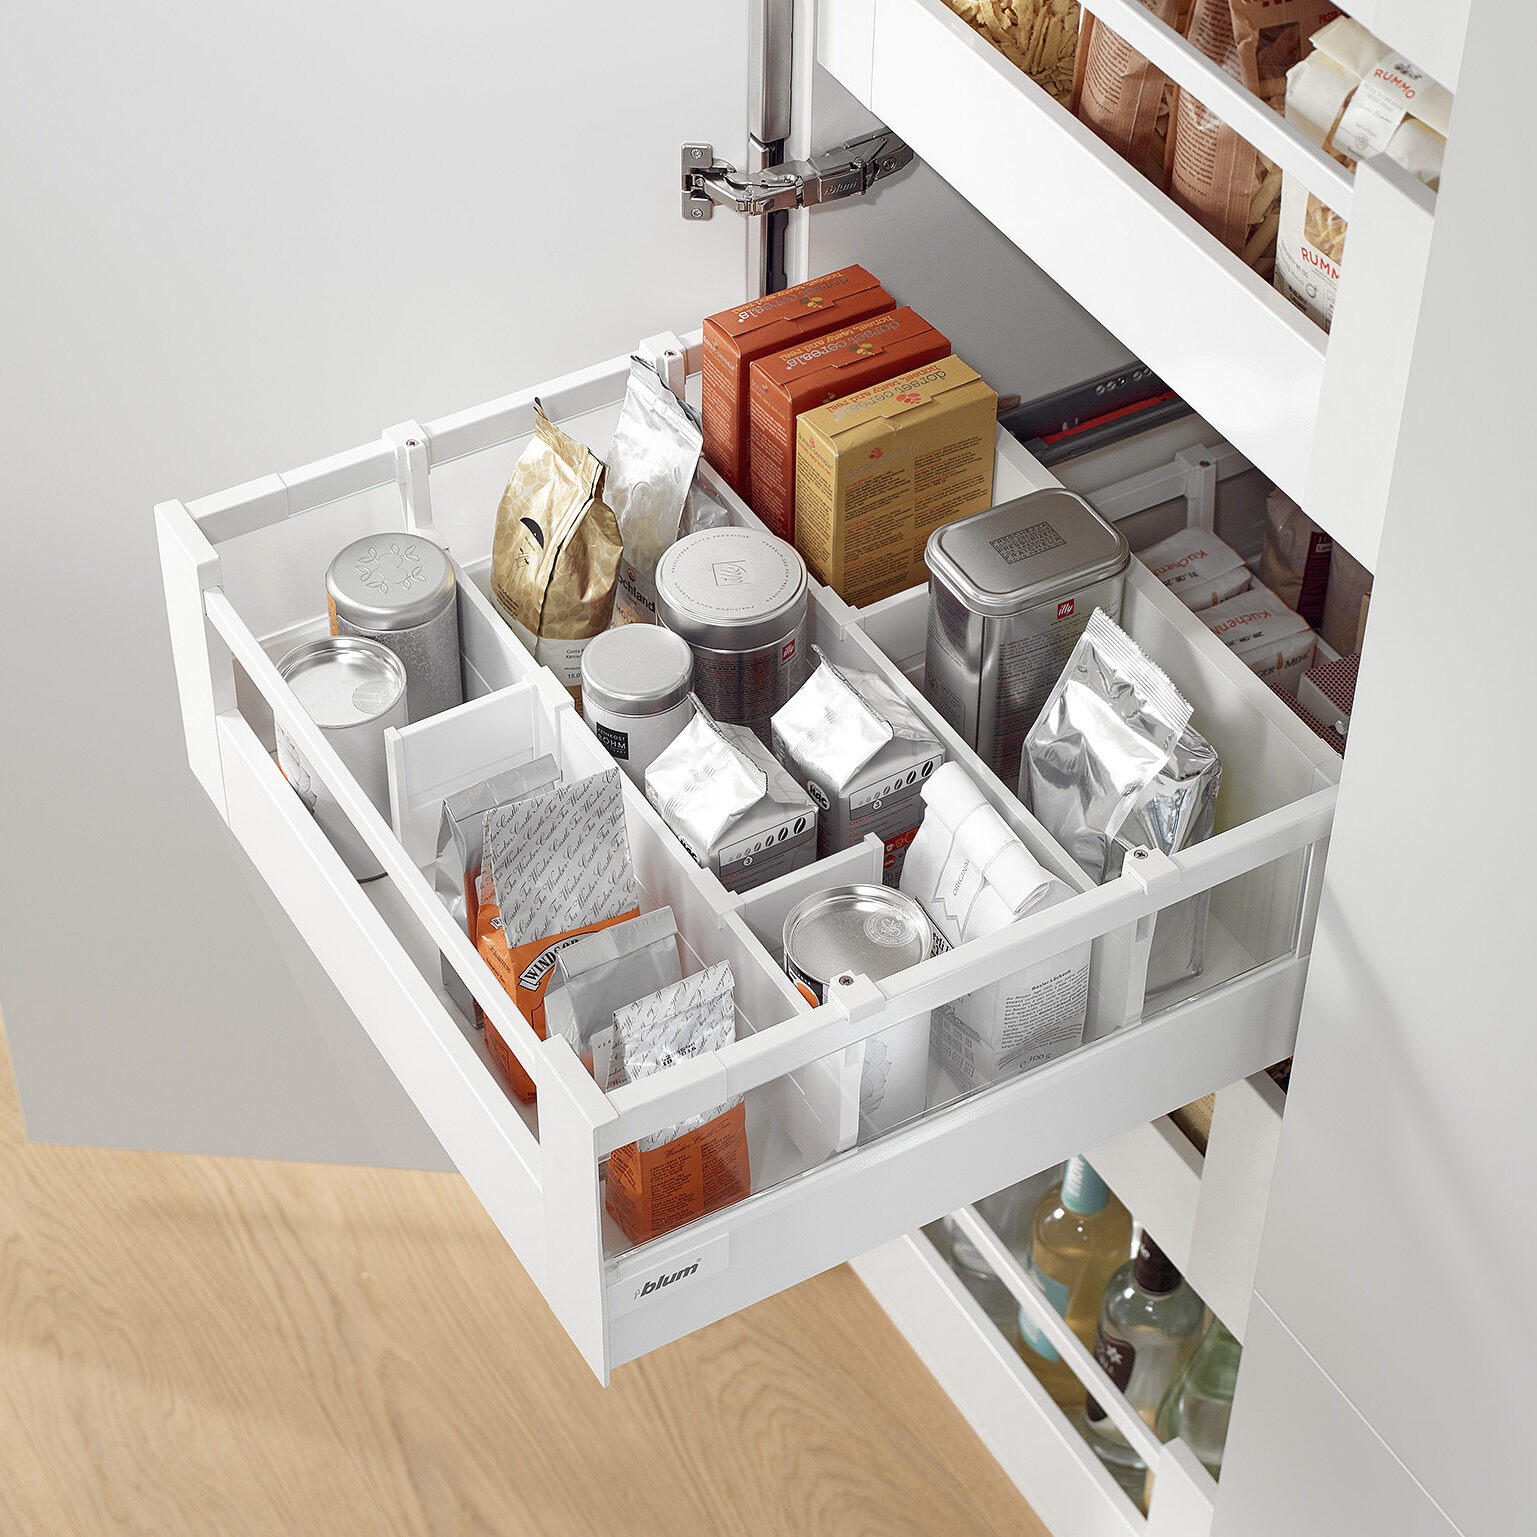 Space Tower Pantry brilliant easy to use ergonomic storage